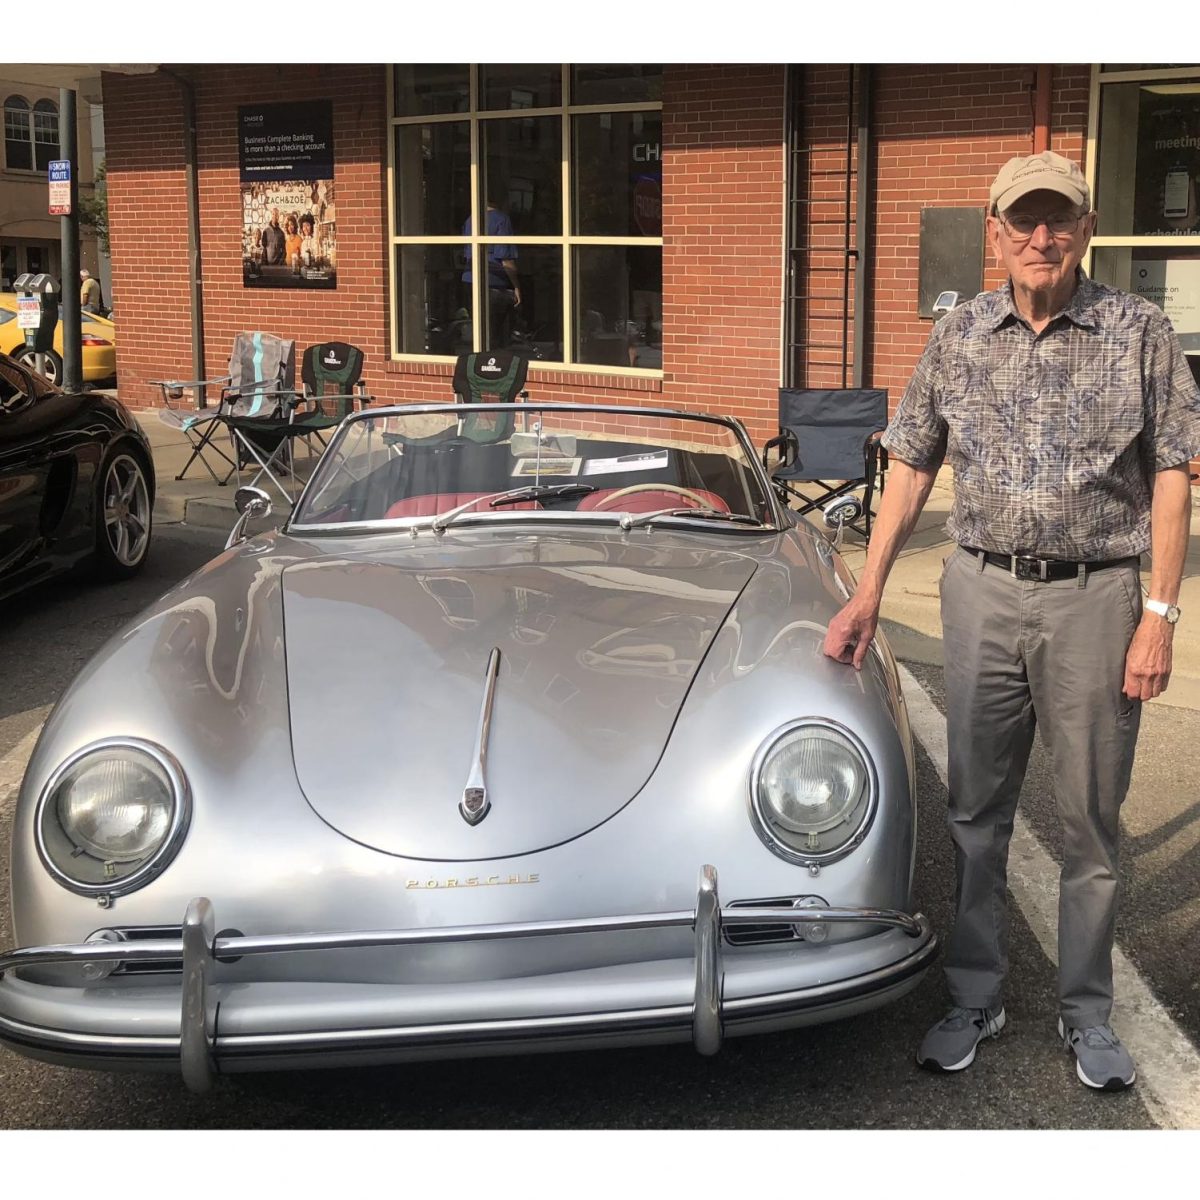 Dick Snyder with his silver 1959 Porsche.